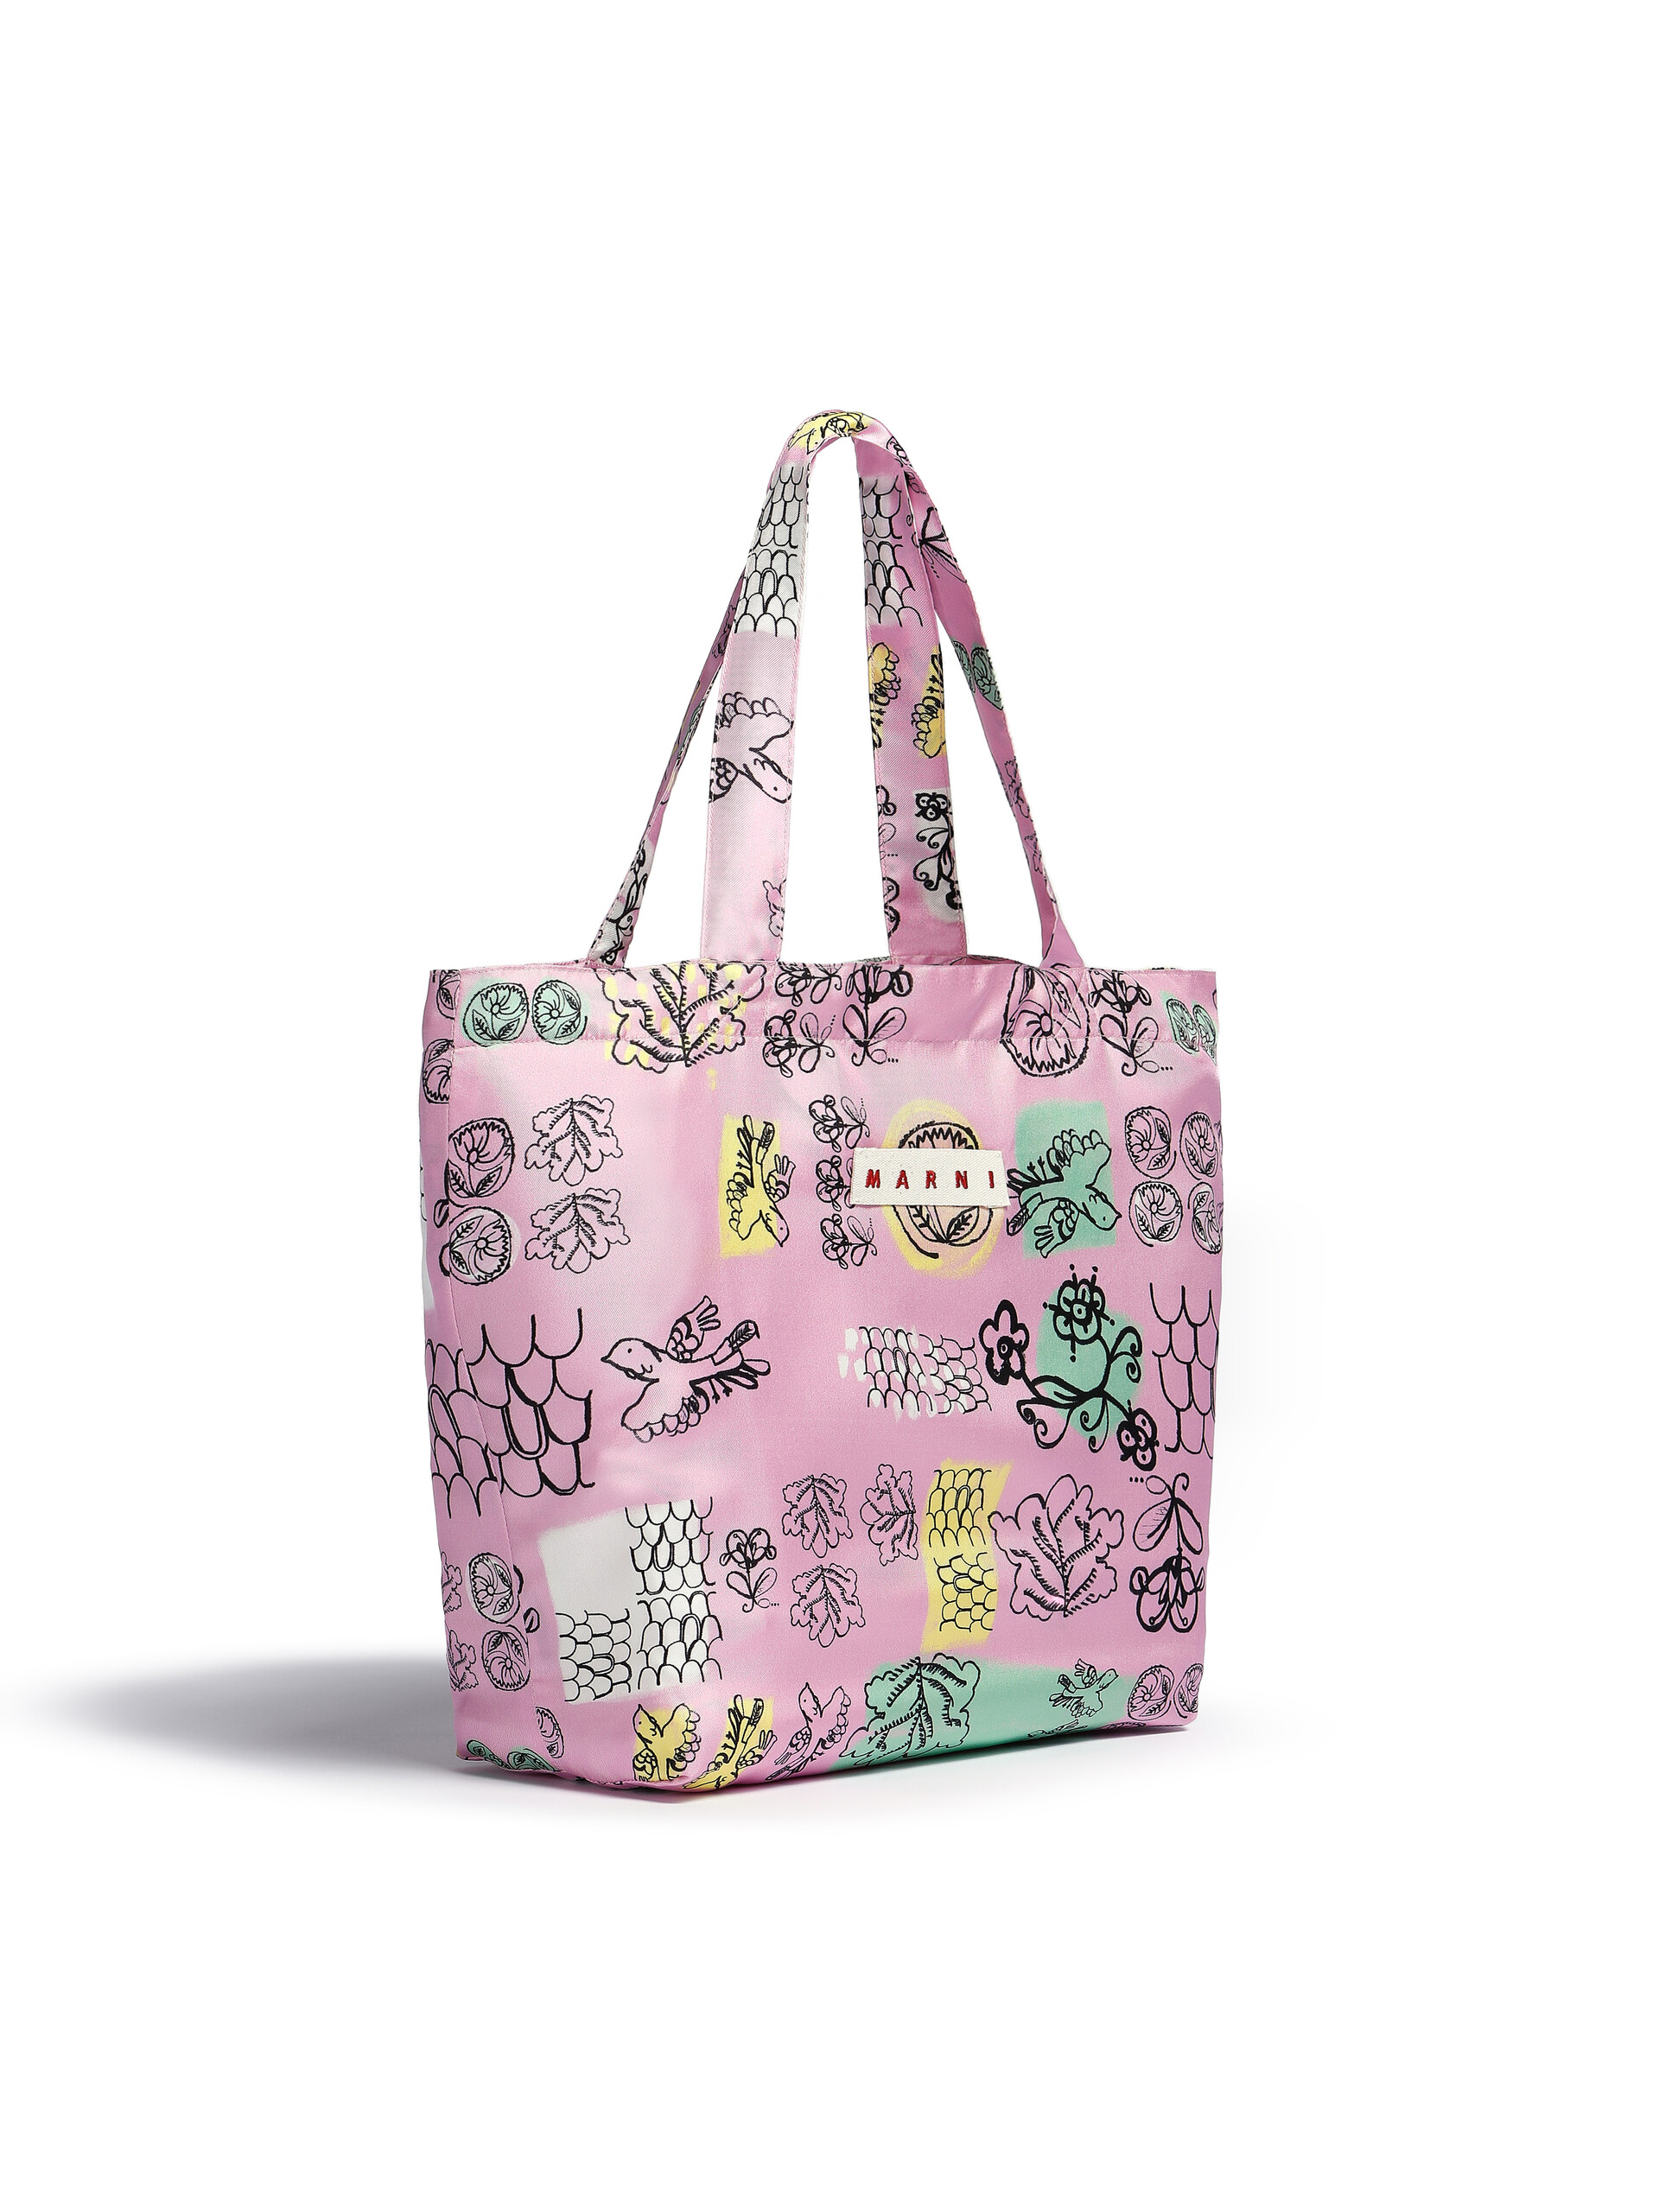 Pink and blue silk tote bag with archival graphic print - Bags - Image 2